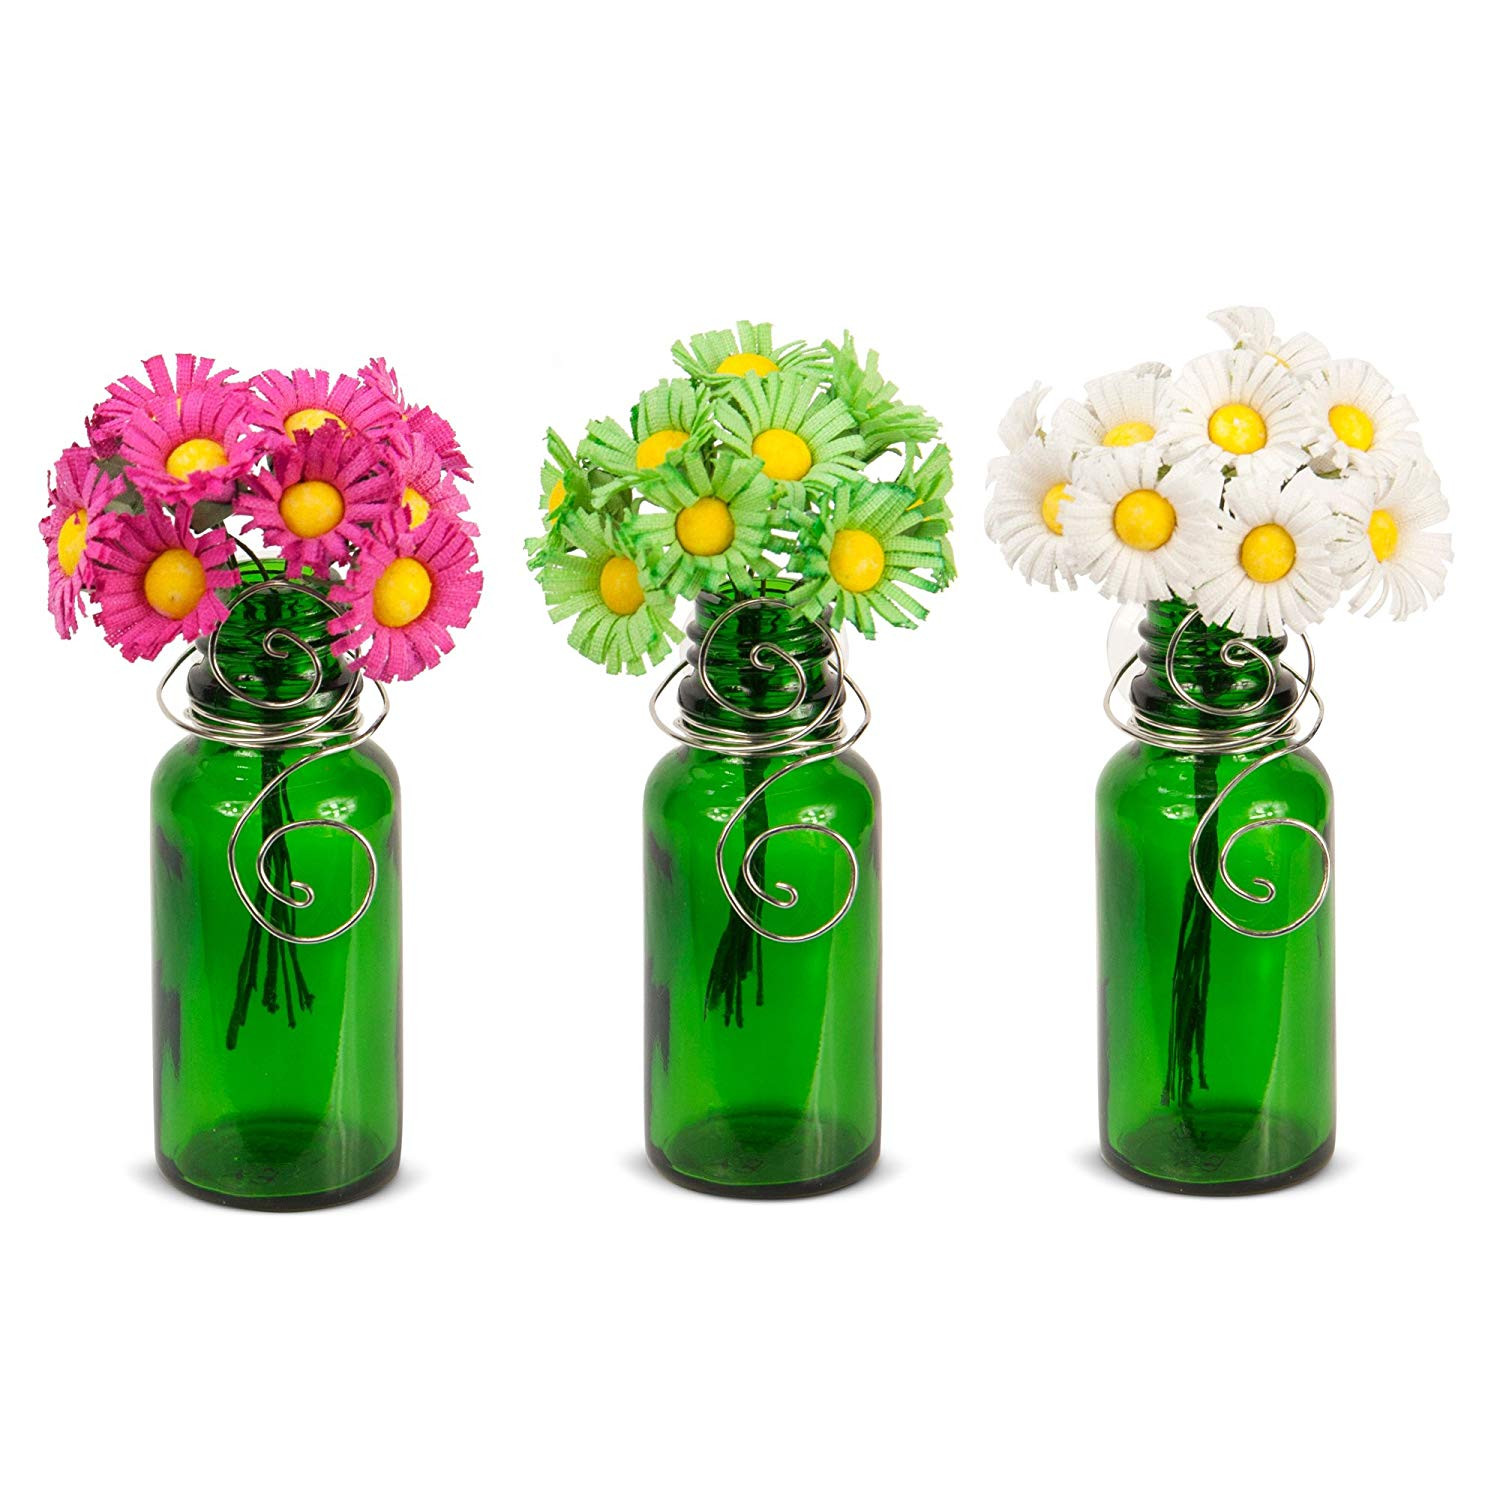 25 Amazing Blue Mason Jar Vase 2024 free download blue mason jar vase of amazon com vazzini mini vase bouquet suction cup bud bottle in amazon com vazzini mini vase bouquet suction cup bud bottle holder with flowers decorative for window mi